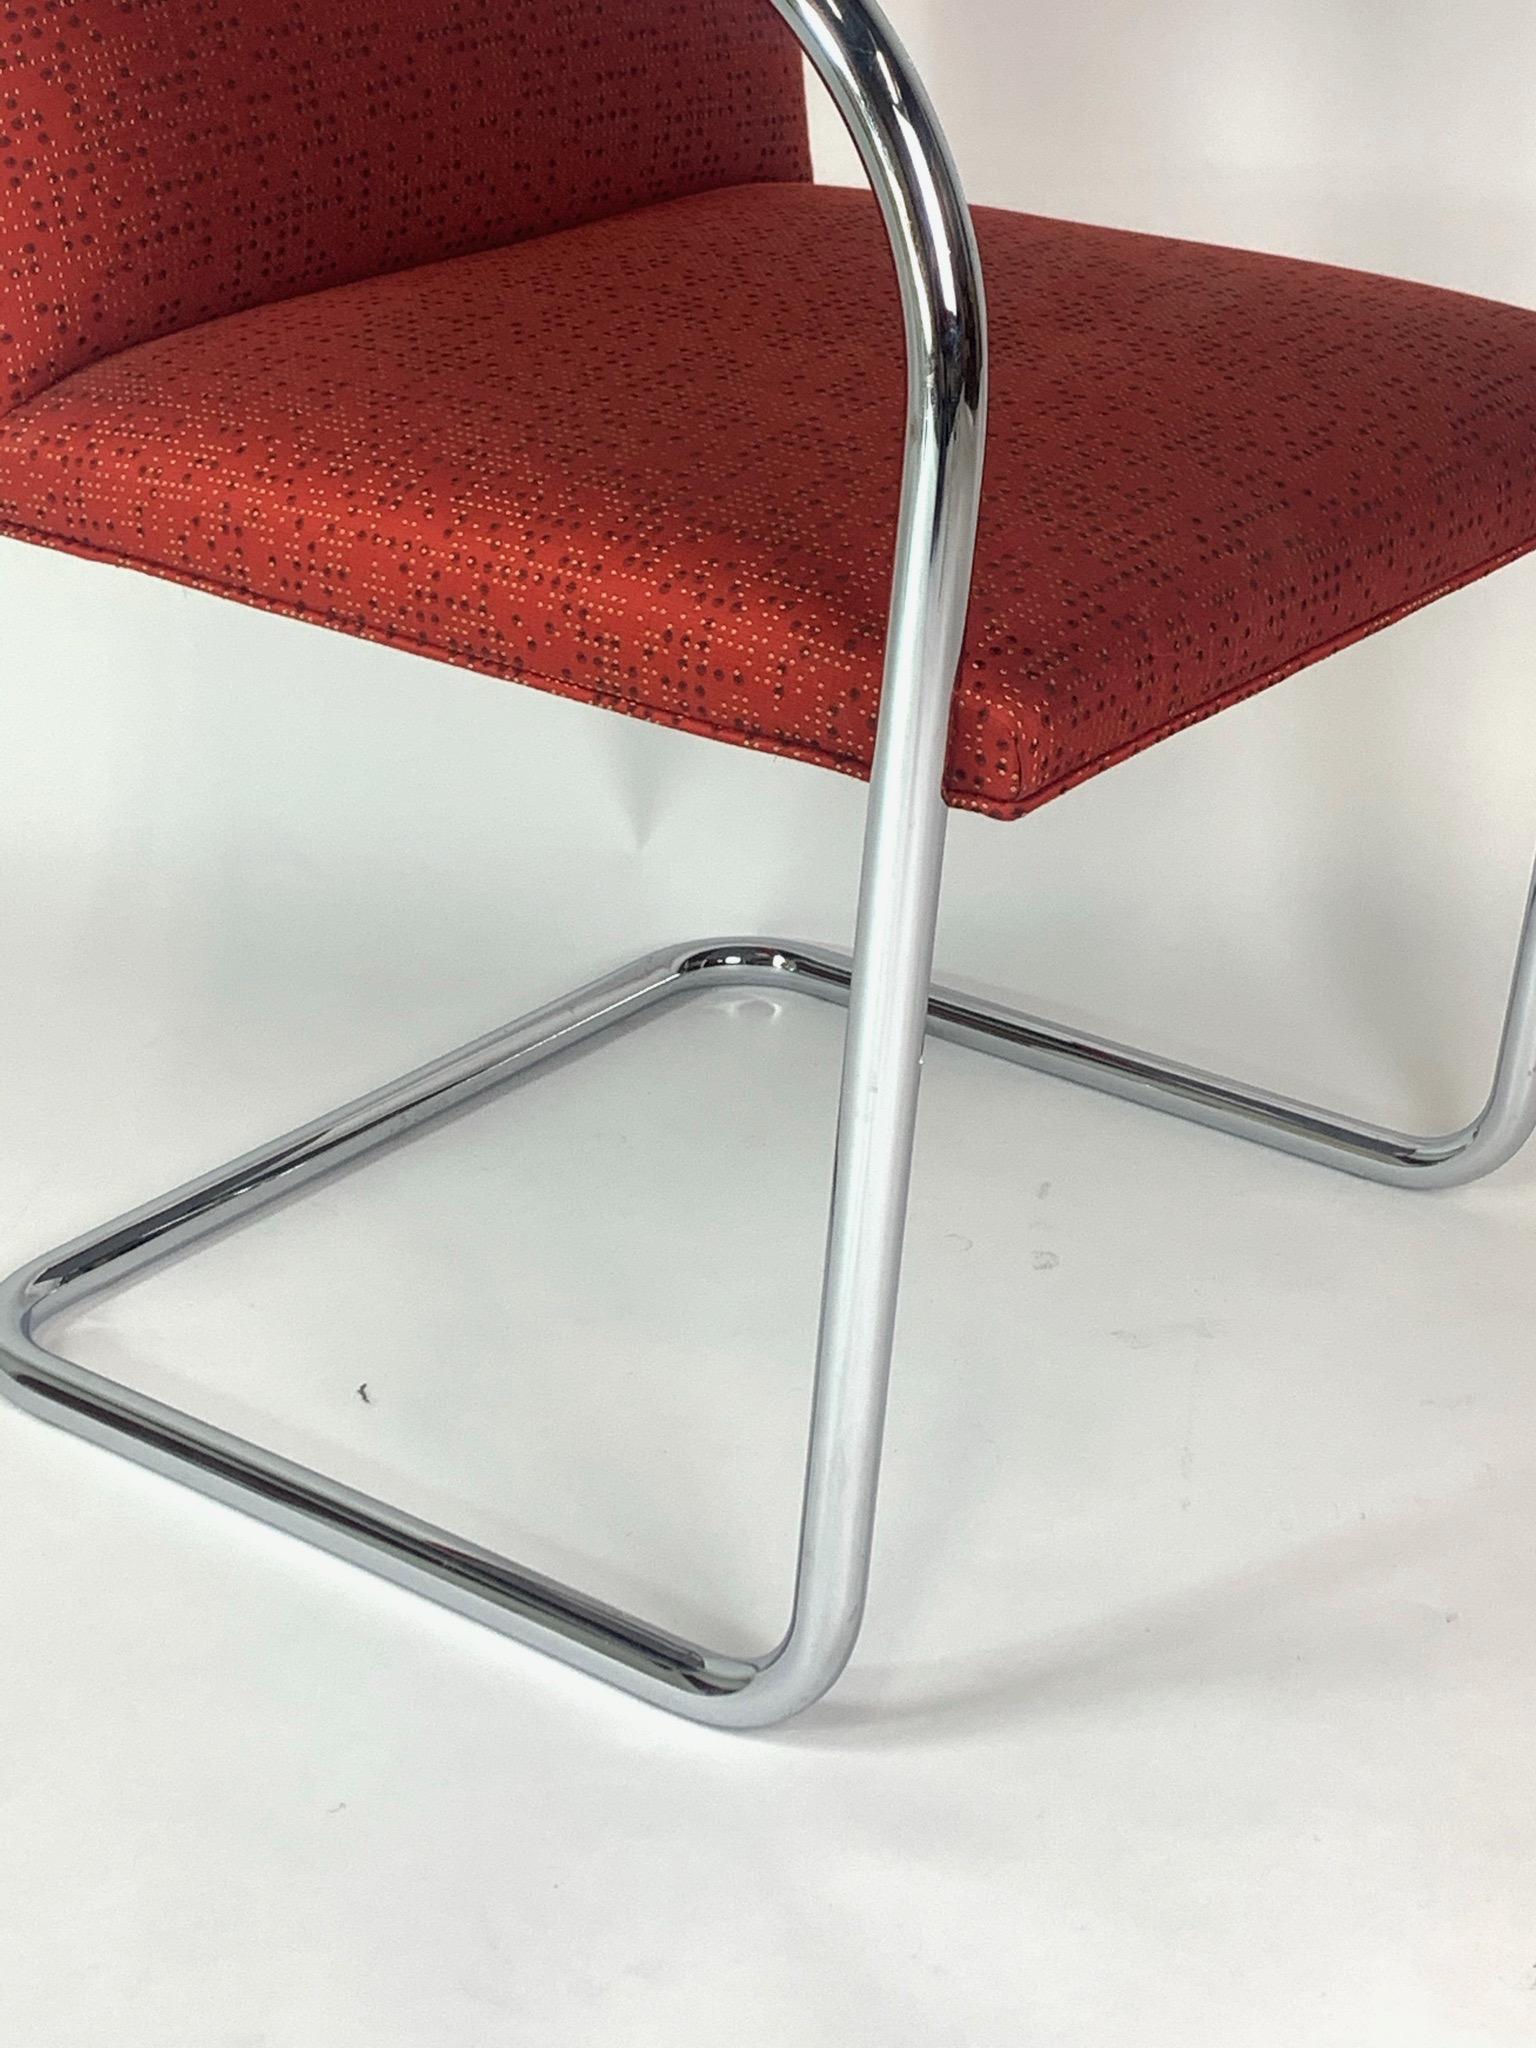 Upholstery Ludwig Mies van der Rohe for Knoll Tubular Brno Chairs 12 Available